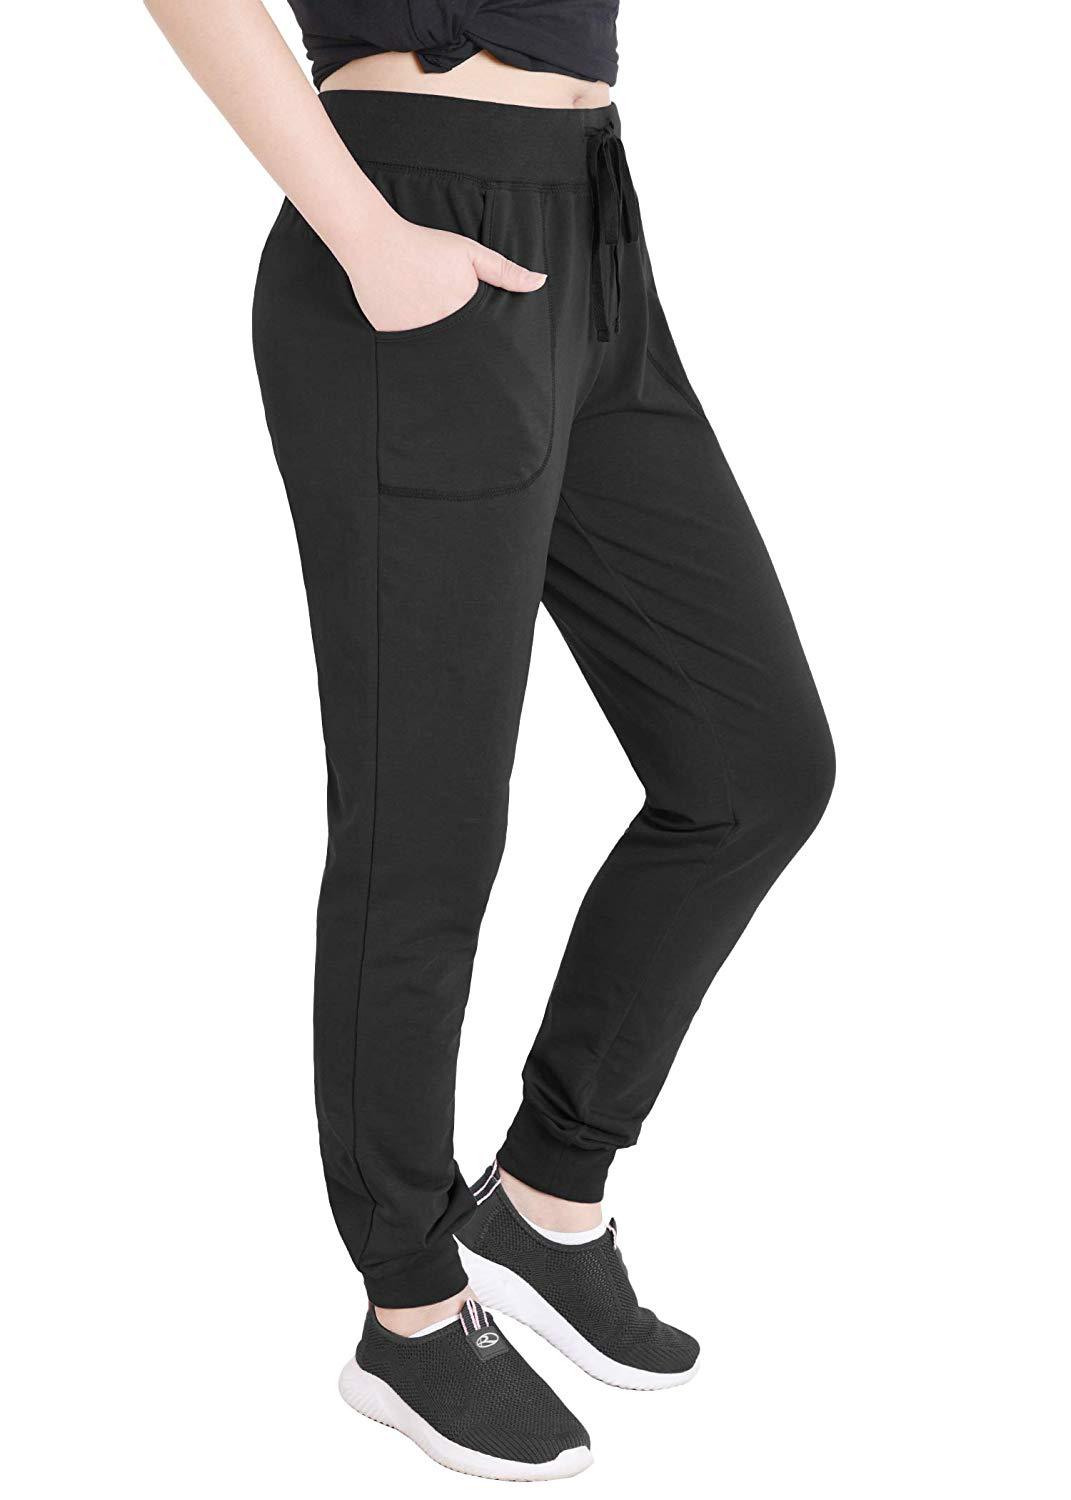 12 Pieces Ladies Single Jersey Cotton Jogger Pants With Pockets In Charcoal  Gray Size Xlarge - Womens Pants - at 